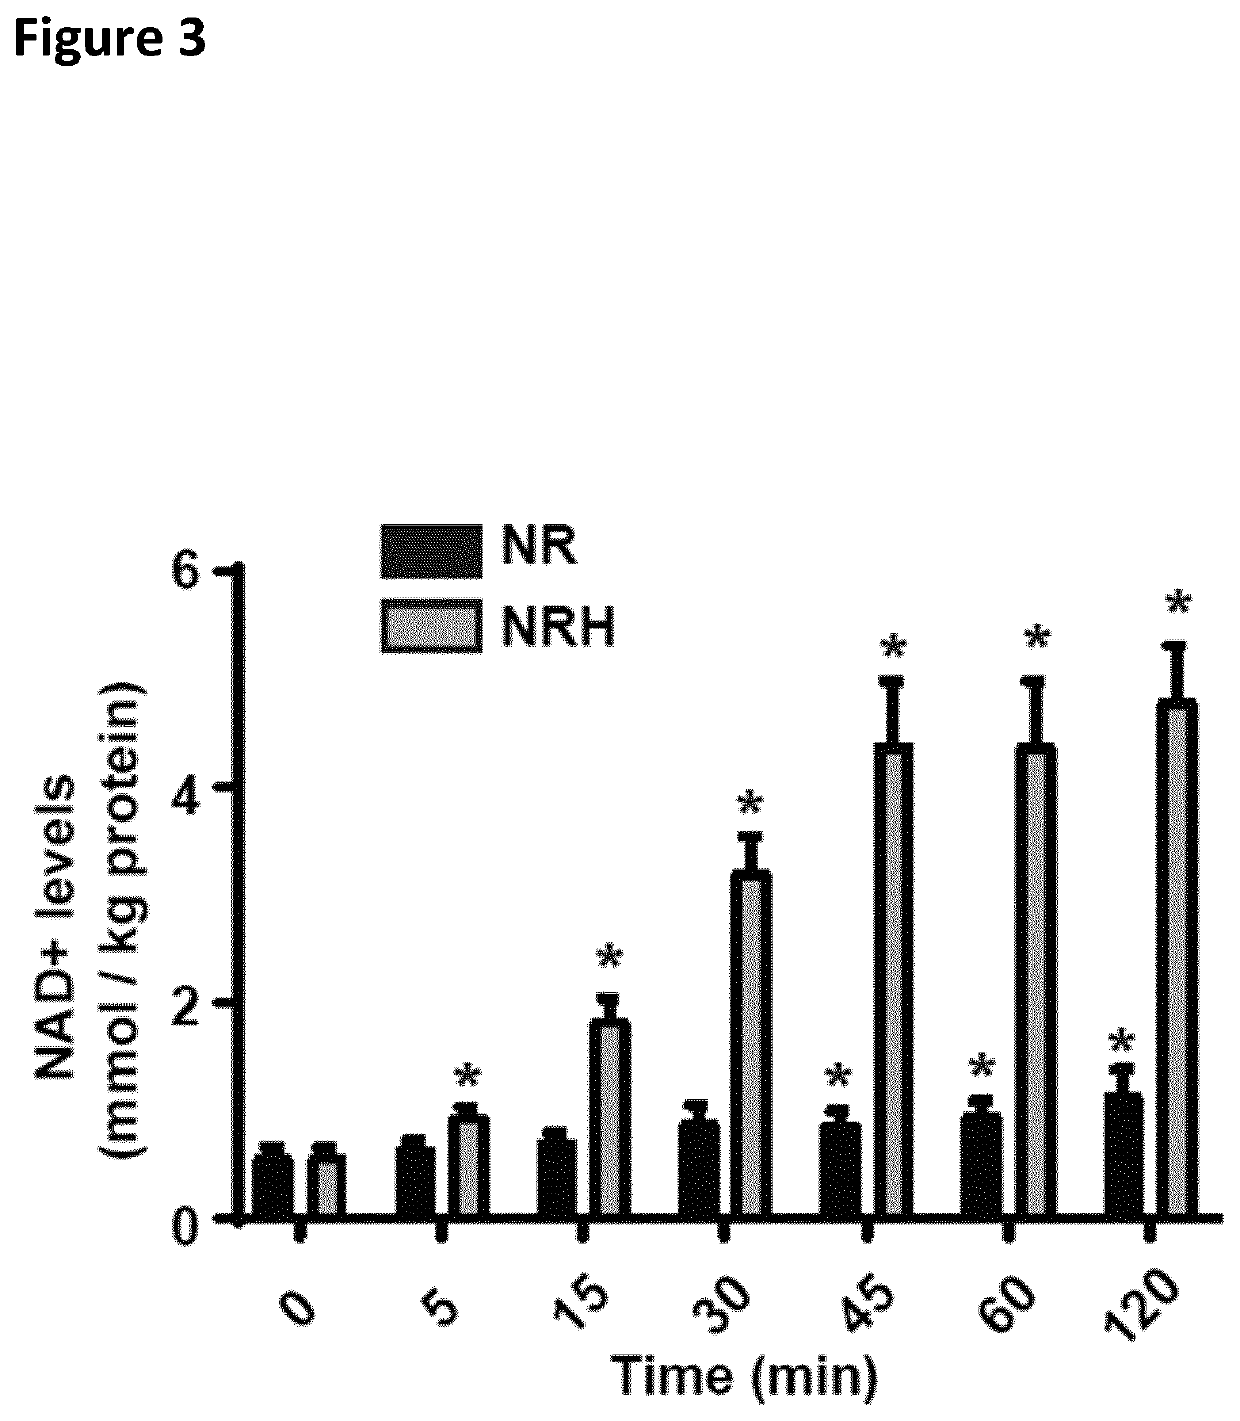 Reduced nicotinamideribosides for treating/preventing skeletal muscle disease